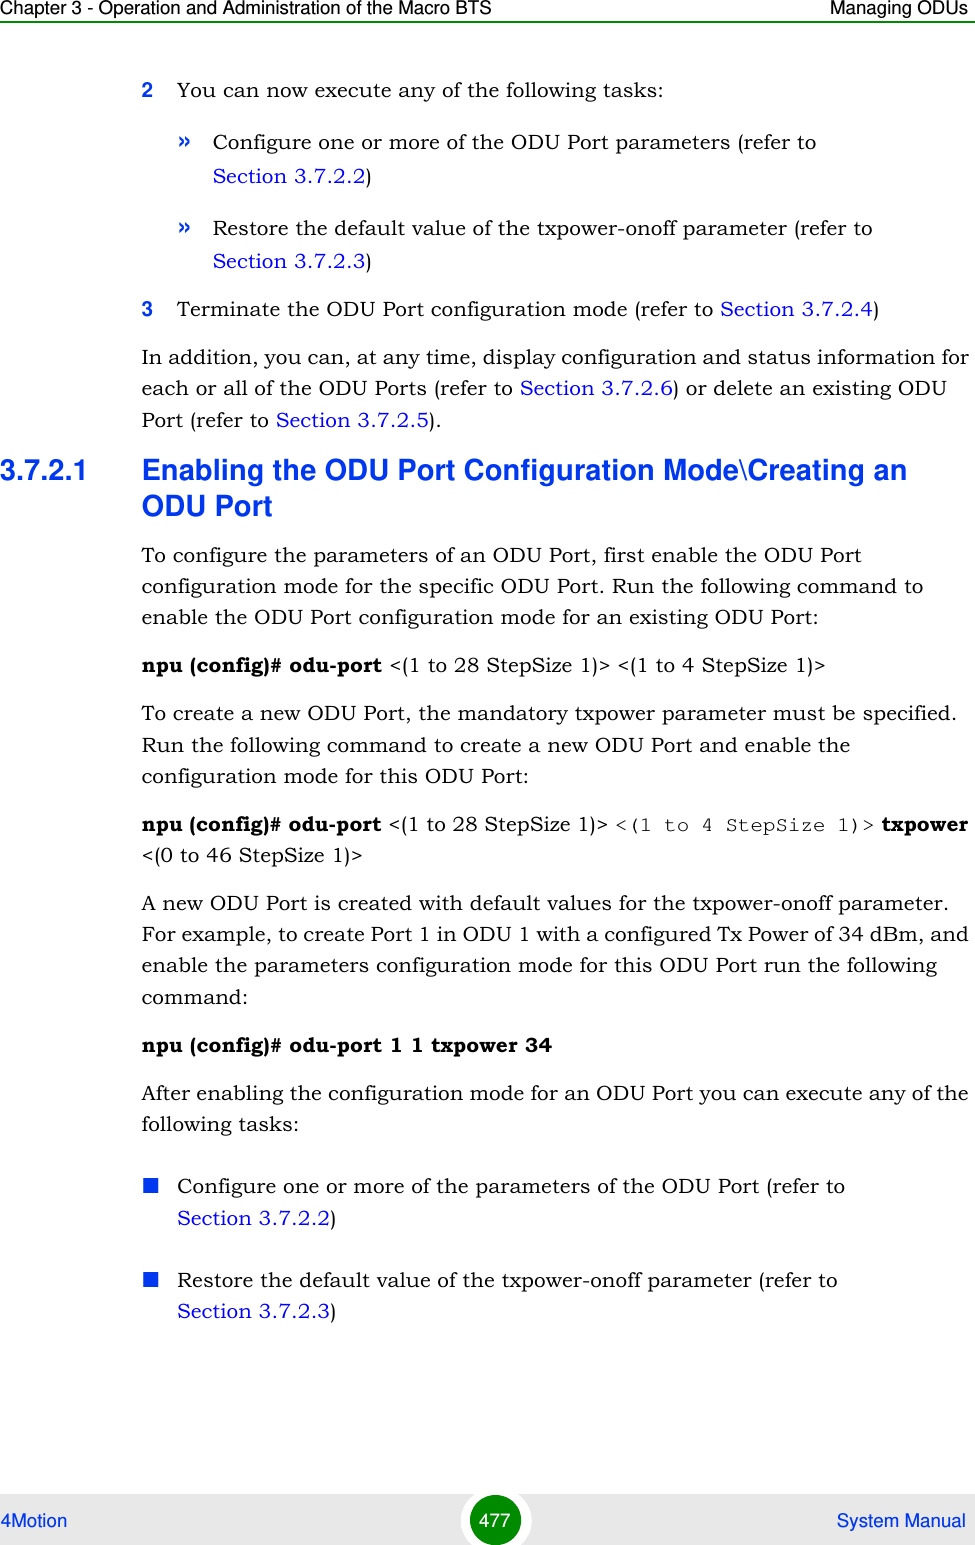 Chapter 3 - Operation and Administration of the Macro BTS Managing ODUs4Motion 477  System Manual2You can now execute any of the following tasks:»Configure one or more of the ODU Port parameters (refer to Section 3.7.2.2)»Restore the default value of the txpower-onoff parameter (refer to Section 3.7.2.3)3Terminate the ODU Port configuration mode (refer to Section 3.7.2.4)In addition, you can, at any time, display configuration and status information for each or all of the ODU Ports (refer to Section 3.7.2.6) or delete an existing ODU Port (refer to Section 3.7.2.5). 3.7.2.1 Enabling the ODU Port Configuration Mode\Creating an ODU PortTo configure the parameters of an ODU Port, first enable the ODU Port configuration mode for the specific ODU Port. Run the following command to enable the ODU Port configuration mode for an existing ODU Port:npu (config)# odu-port &lt;(1 to 28 StepSize 1)&gt; &lt;(1 to 4 StepSize 1)&gt;To create a new ODU Port, the mandatory txpower parameter must be specified. Run the following command to create a new ODU Port and enable the configuration mode for this ODU Port:npu (config)# odu-port &lt;(1 to 28 StepSize 1)&gt; &lt;(1 to 4 StepSize 1)&gt; txpower &lt;(0 to 46 StepSize 1)&gt;A new ODU Port is created with default values for the txpower-onoff parameter. For example, to create Port 1 in ODU 1 with a configured Tx Power of 34 dBm, and enable the parameters configuration mode for this ODU Port run the following command:npu (config)# odu-port 1 1 txpower 34After enabling the configuration mode for an ODU Port you can execute any of the following tasks:Configure one or more of the parameters of the ODU Port (refer to Section 3.7.2.2)Restore the default value of the txpower-onoff parameter (refer to Section 3.7.2.3)